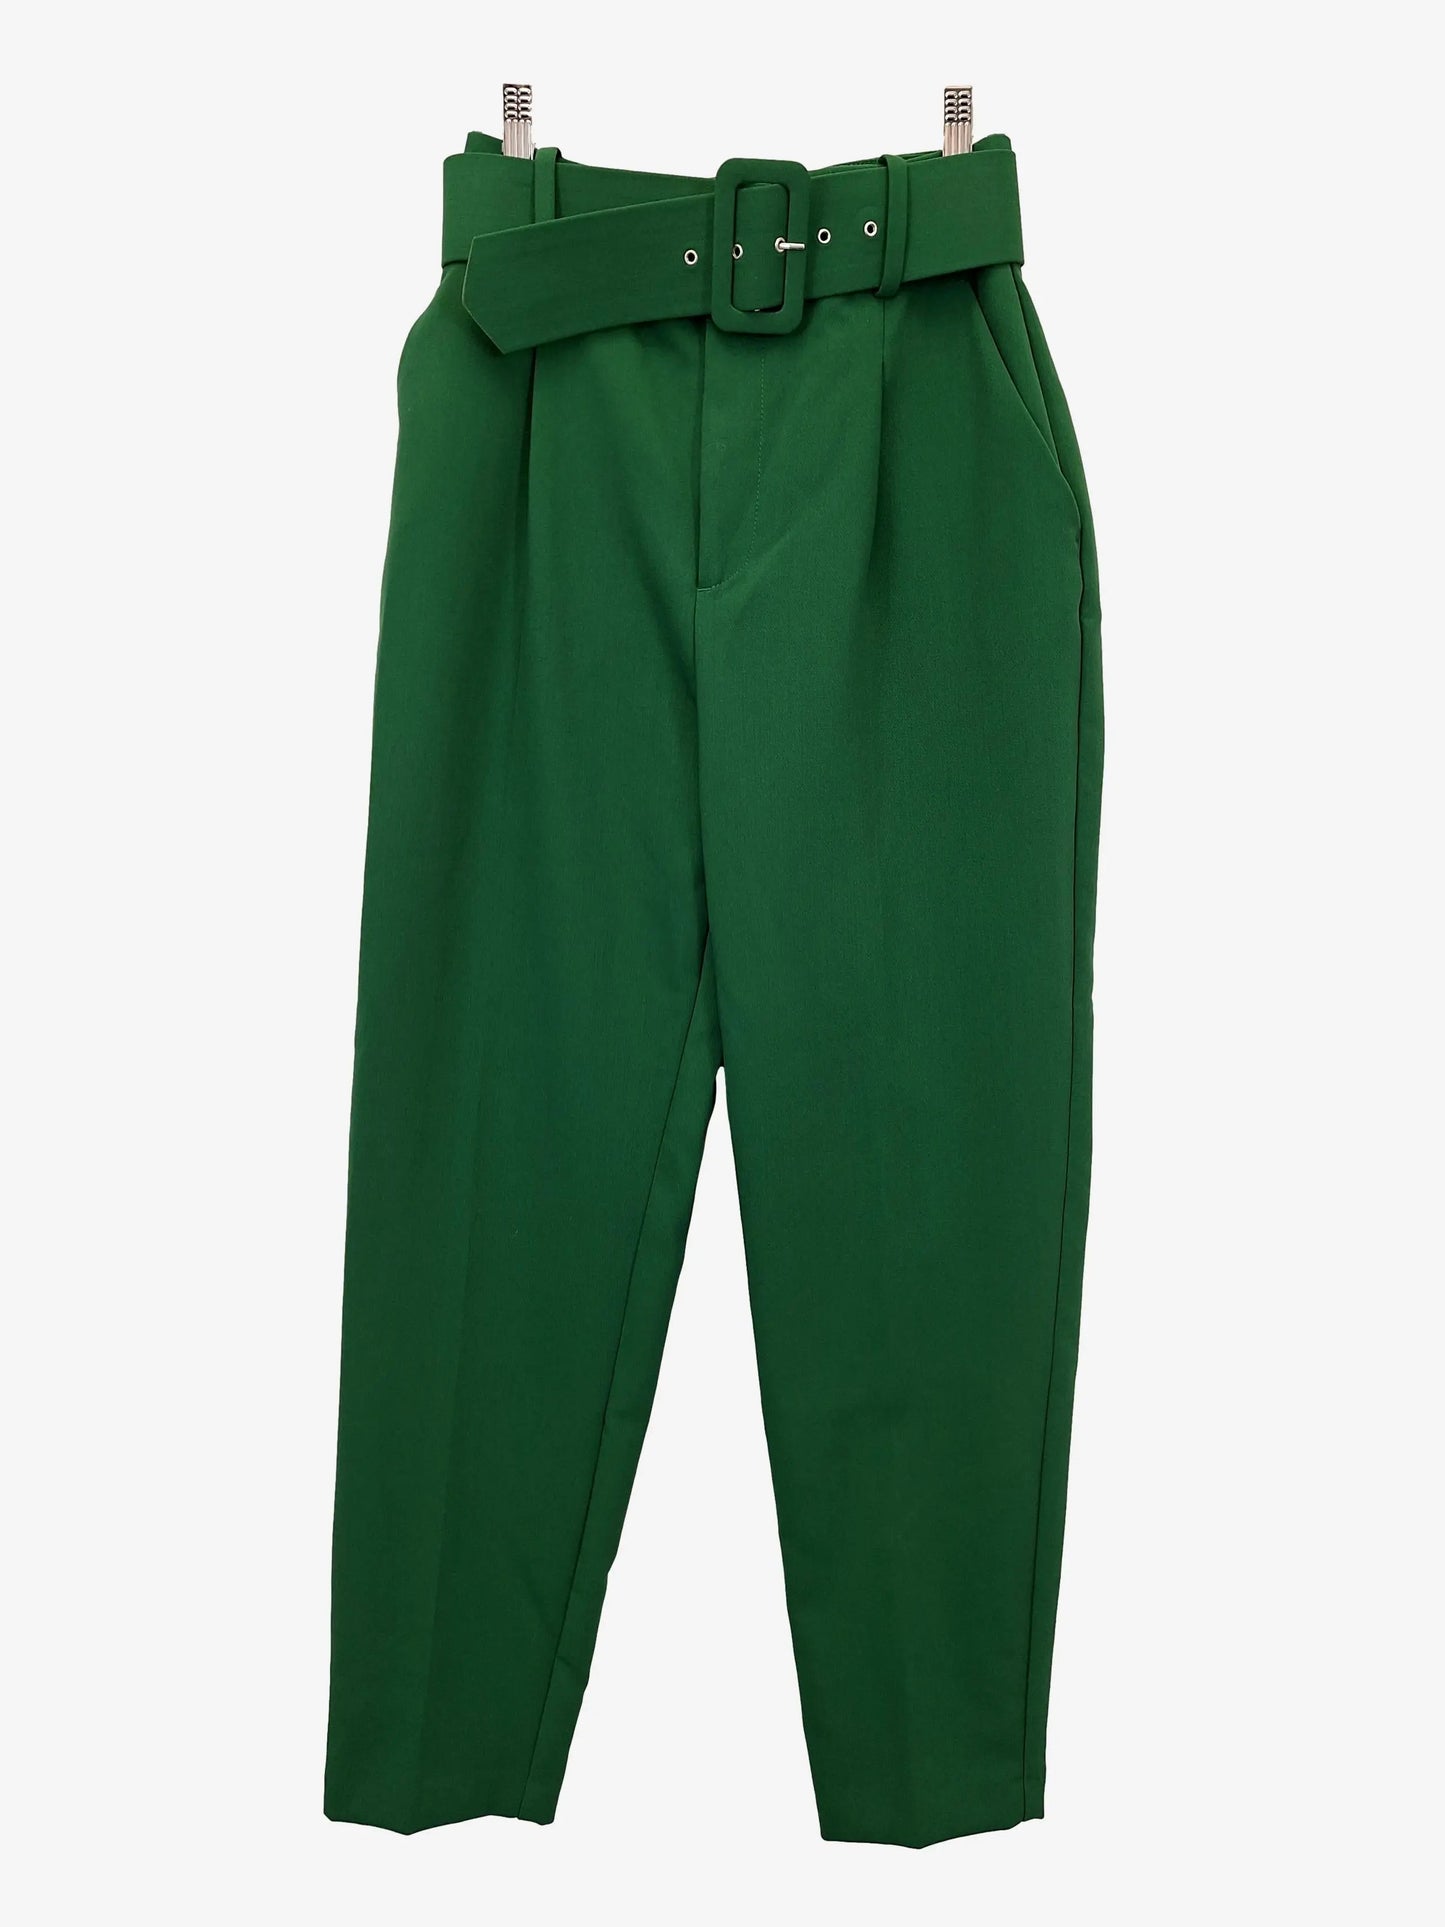 Zara High Waisted Belted Office Pants Size 6 – SwapUp